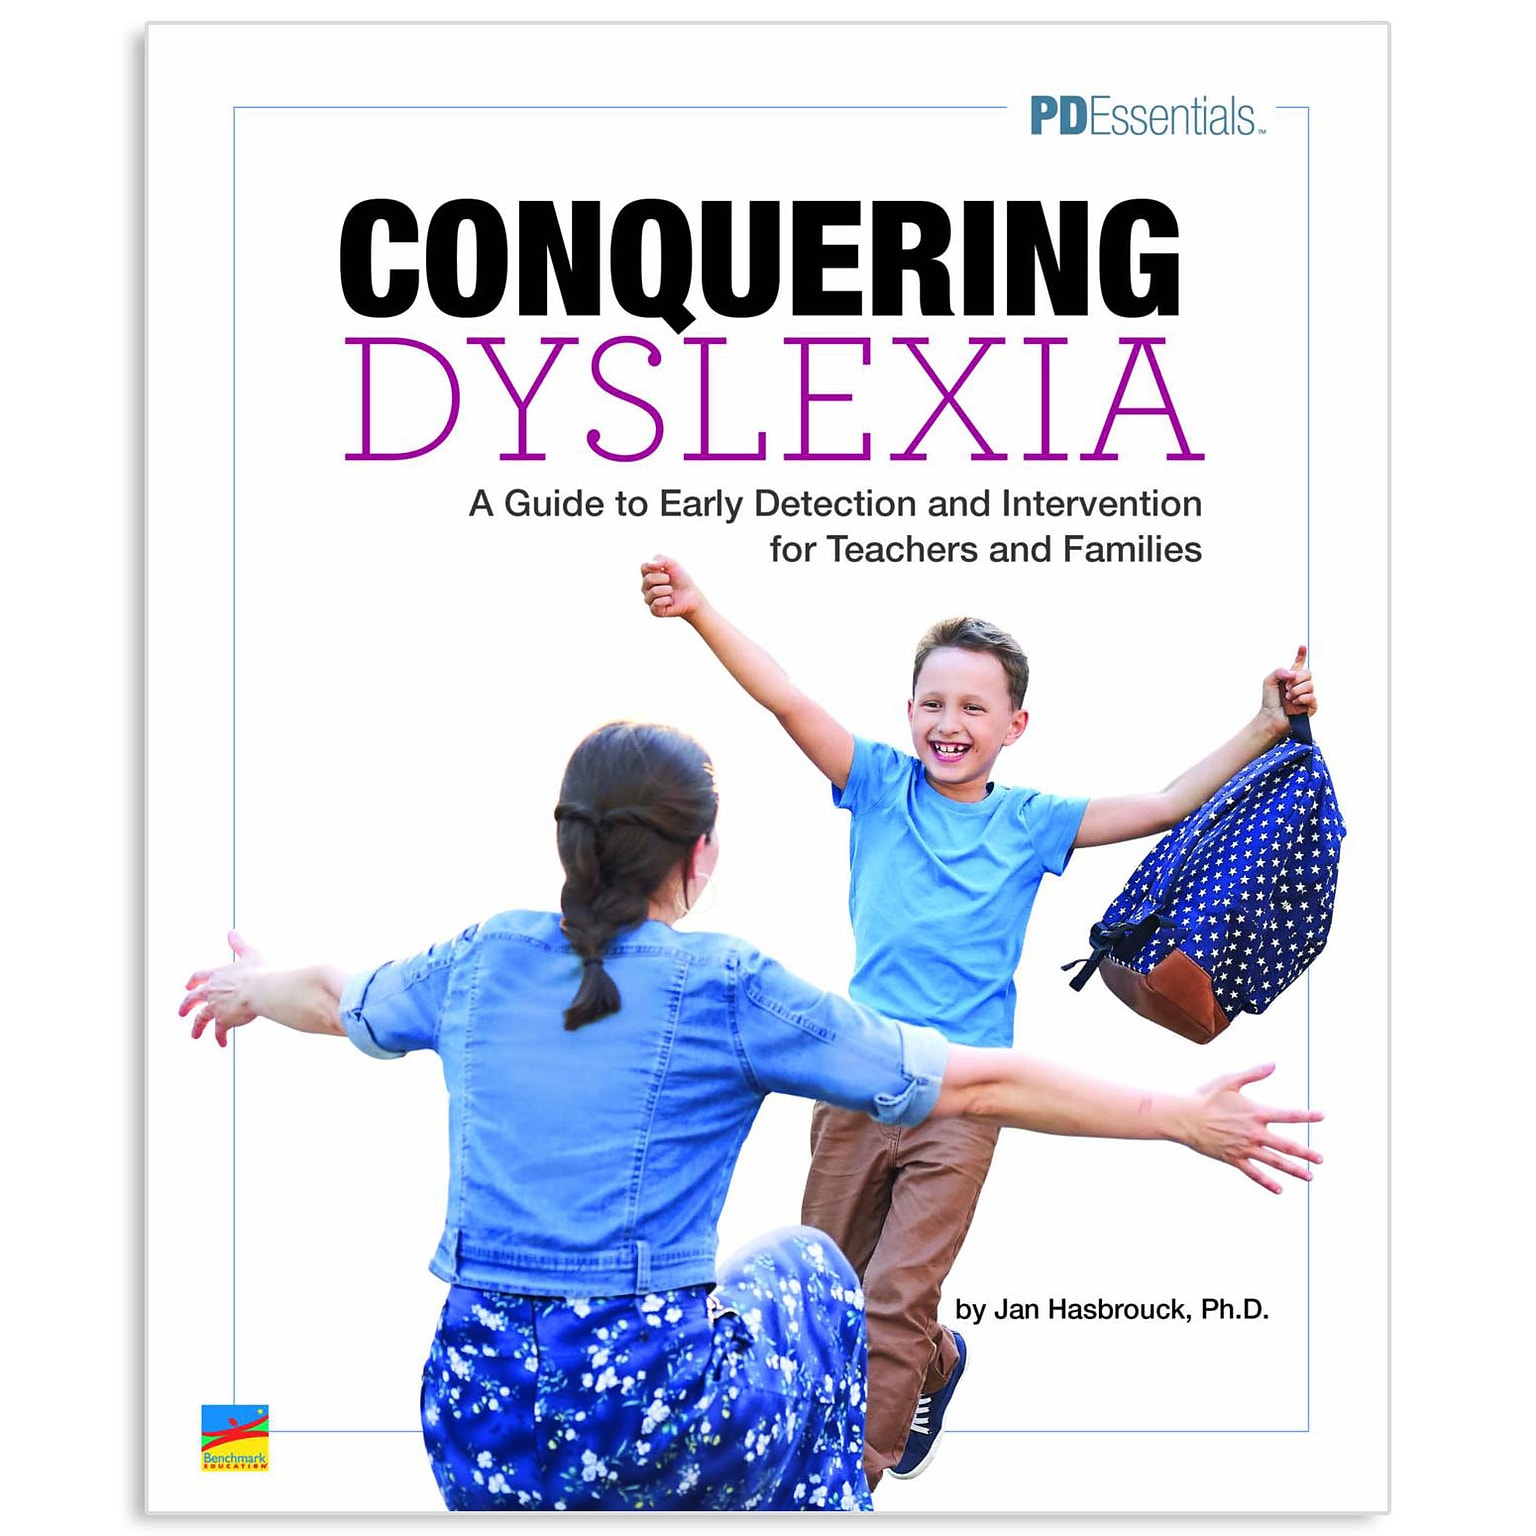 PD Essentials Conquering Dyslexia: A Guide to Early Detection and Prevention for Teachers and Families Resource Book